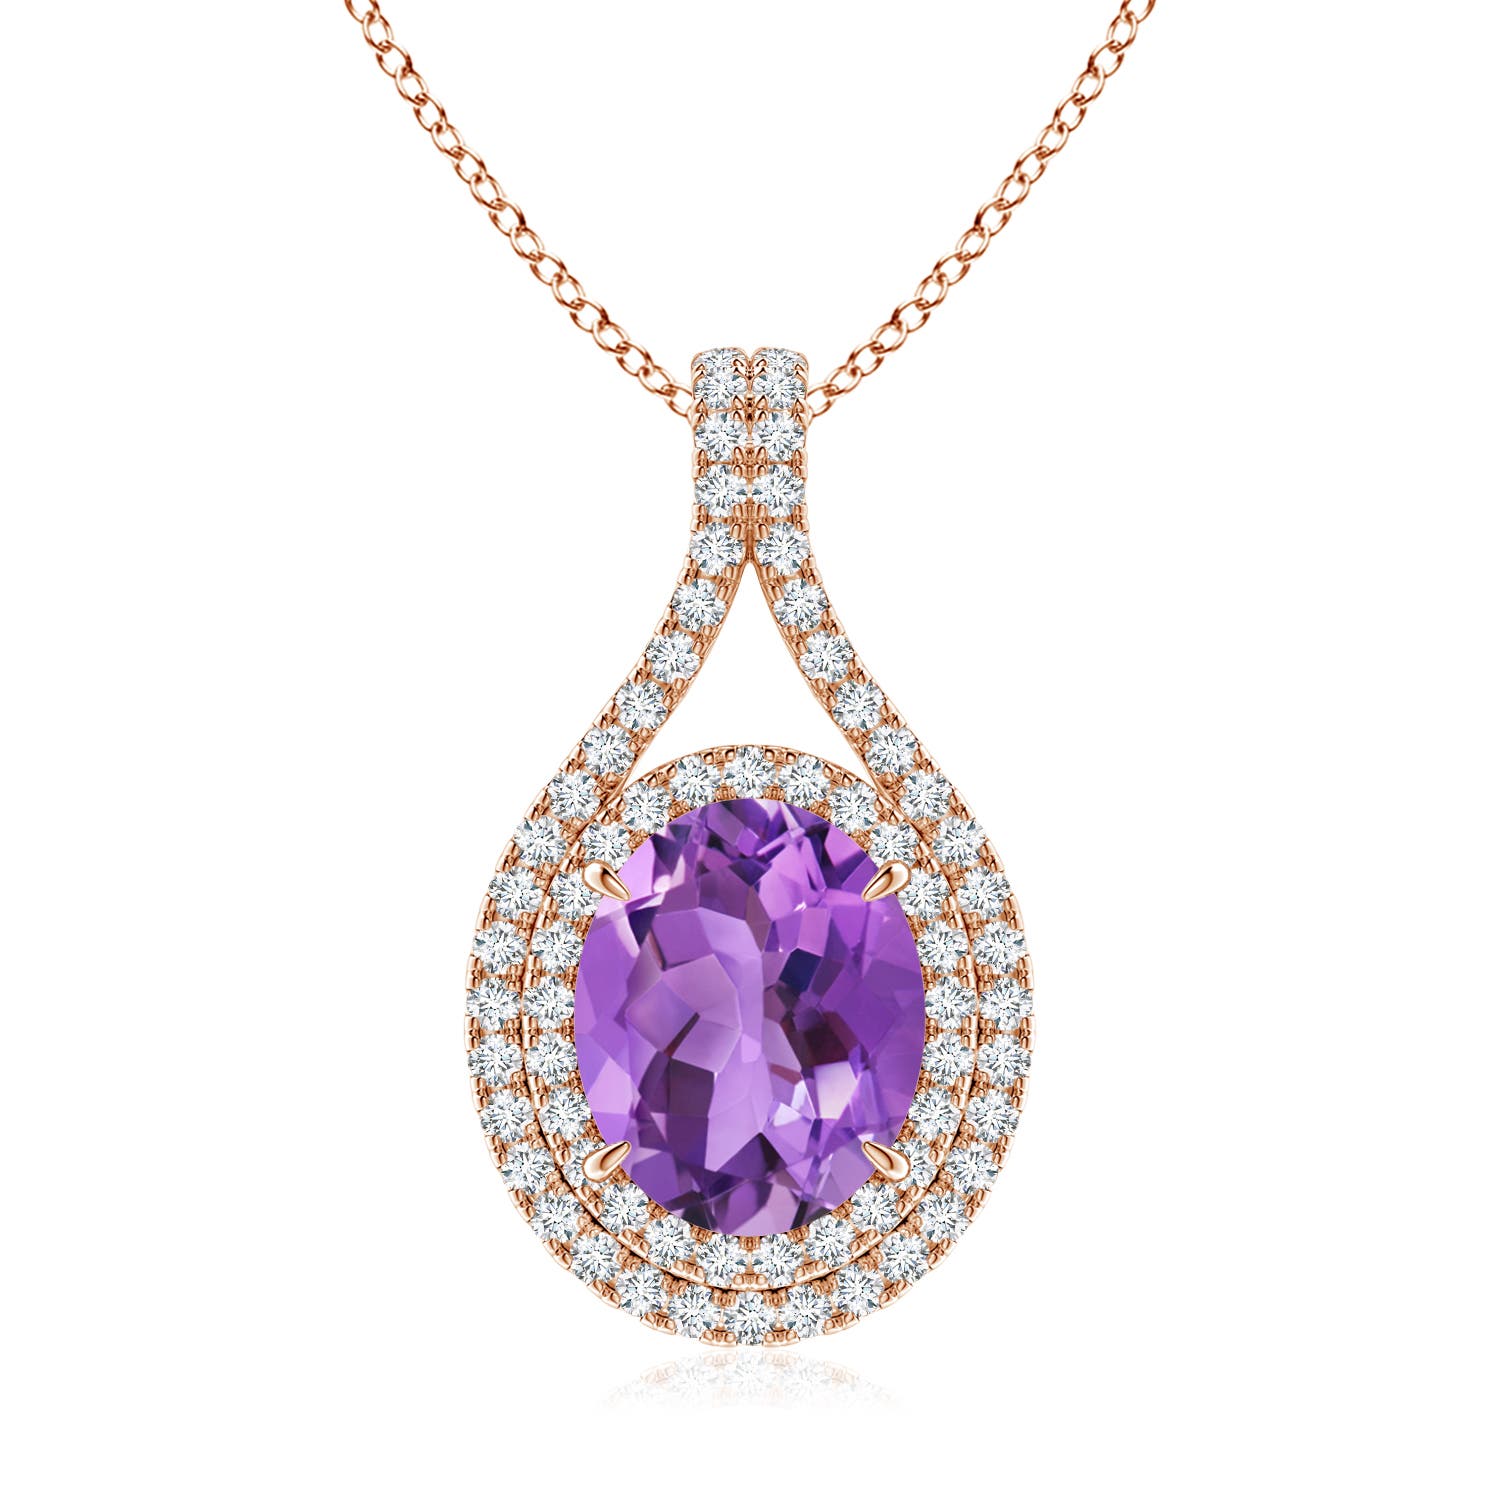 AA - Amethyst / 2.75 CT / 14 KT Rose Gold